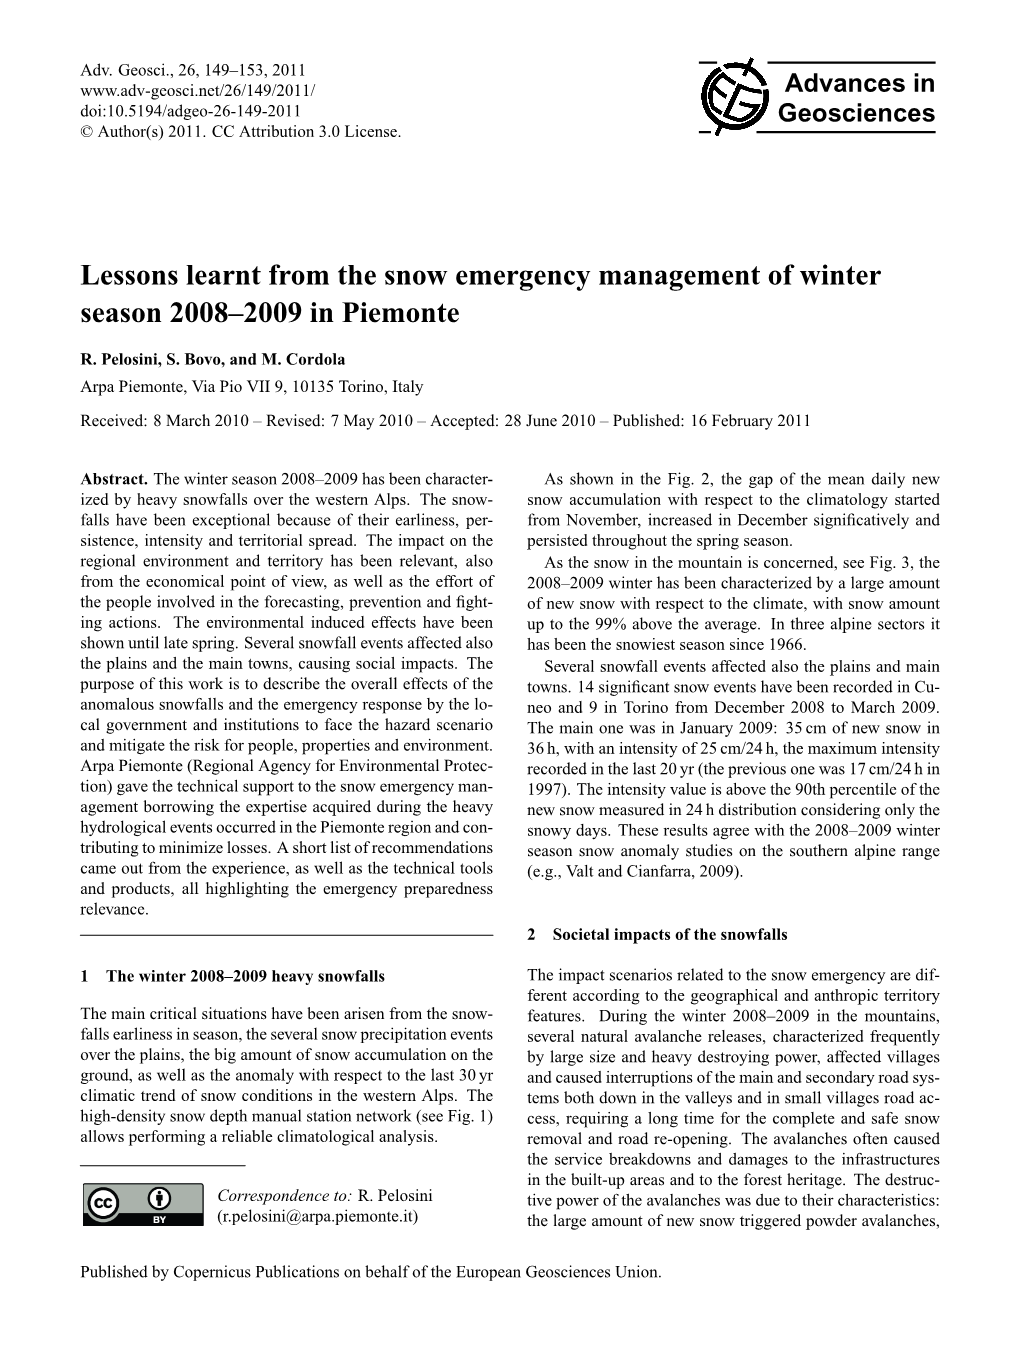 Lessons Learnt from the Snow Emergency Management of Winter Season 2008–2009 in Piemonte